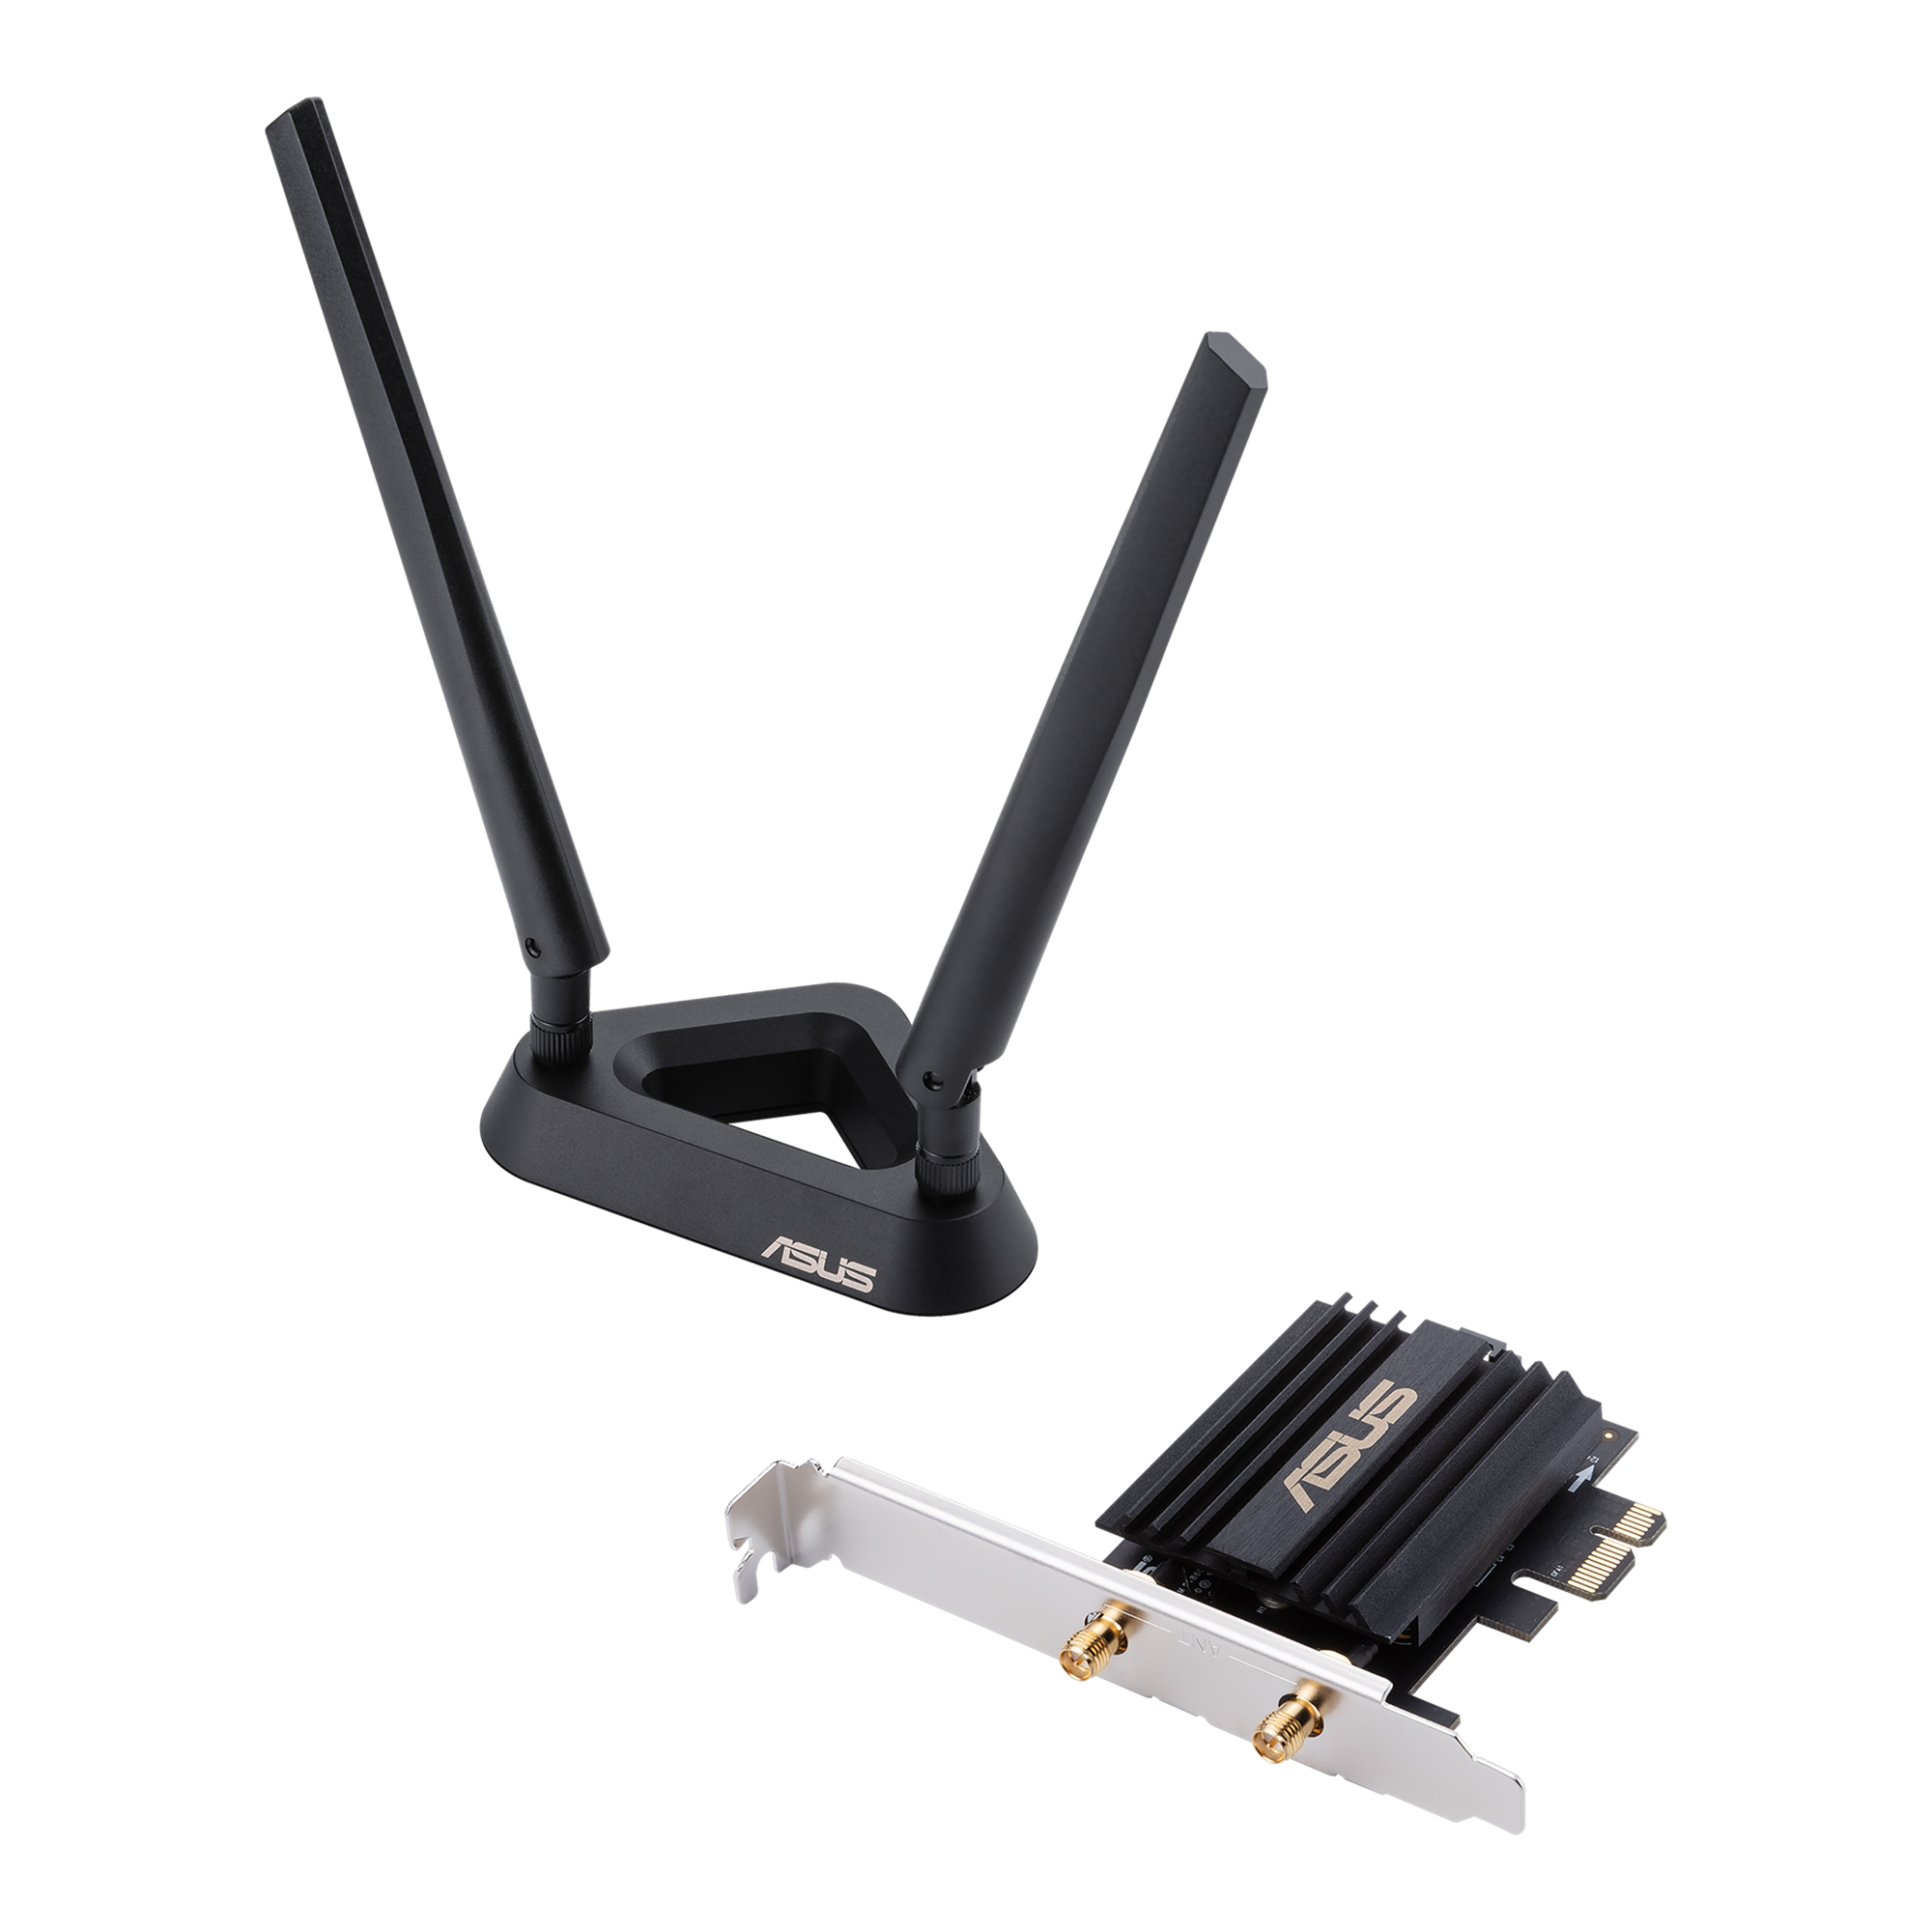 PCE-AX58BT｜Wireless & Wired Adapters｜ASUS USA